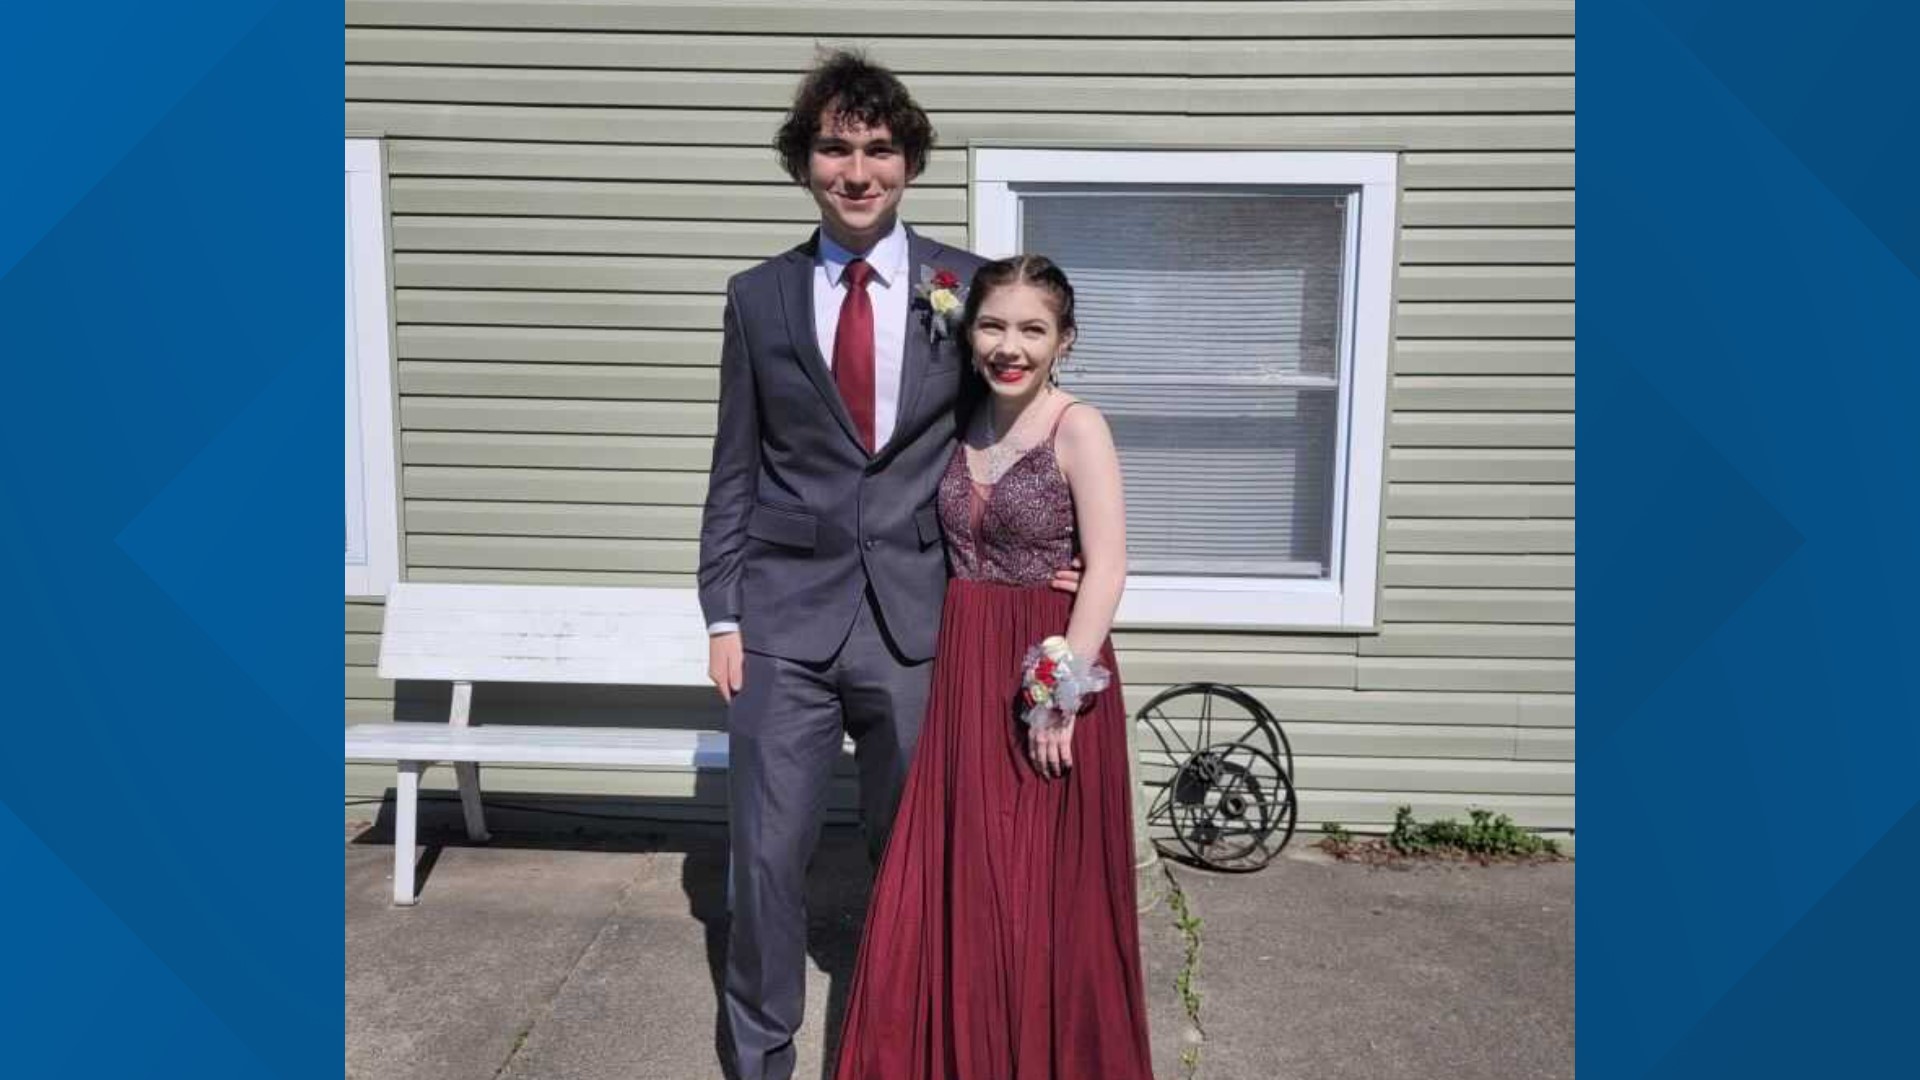 Hamilton Heights senior Kalen Hart and her date, Cathedral High School junior Lendon Byram died in a crash on their way to prom Saturday.